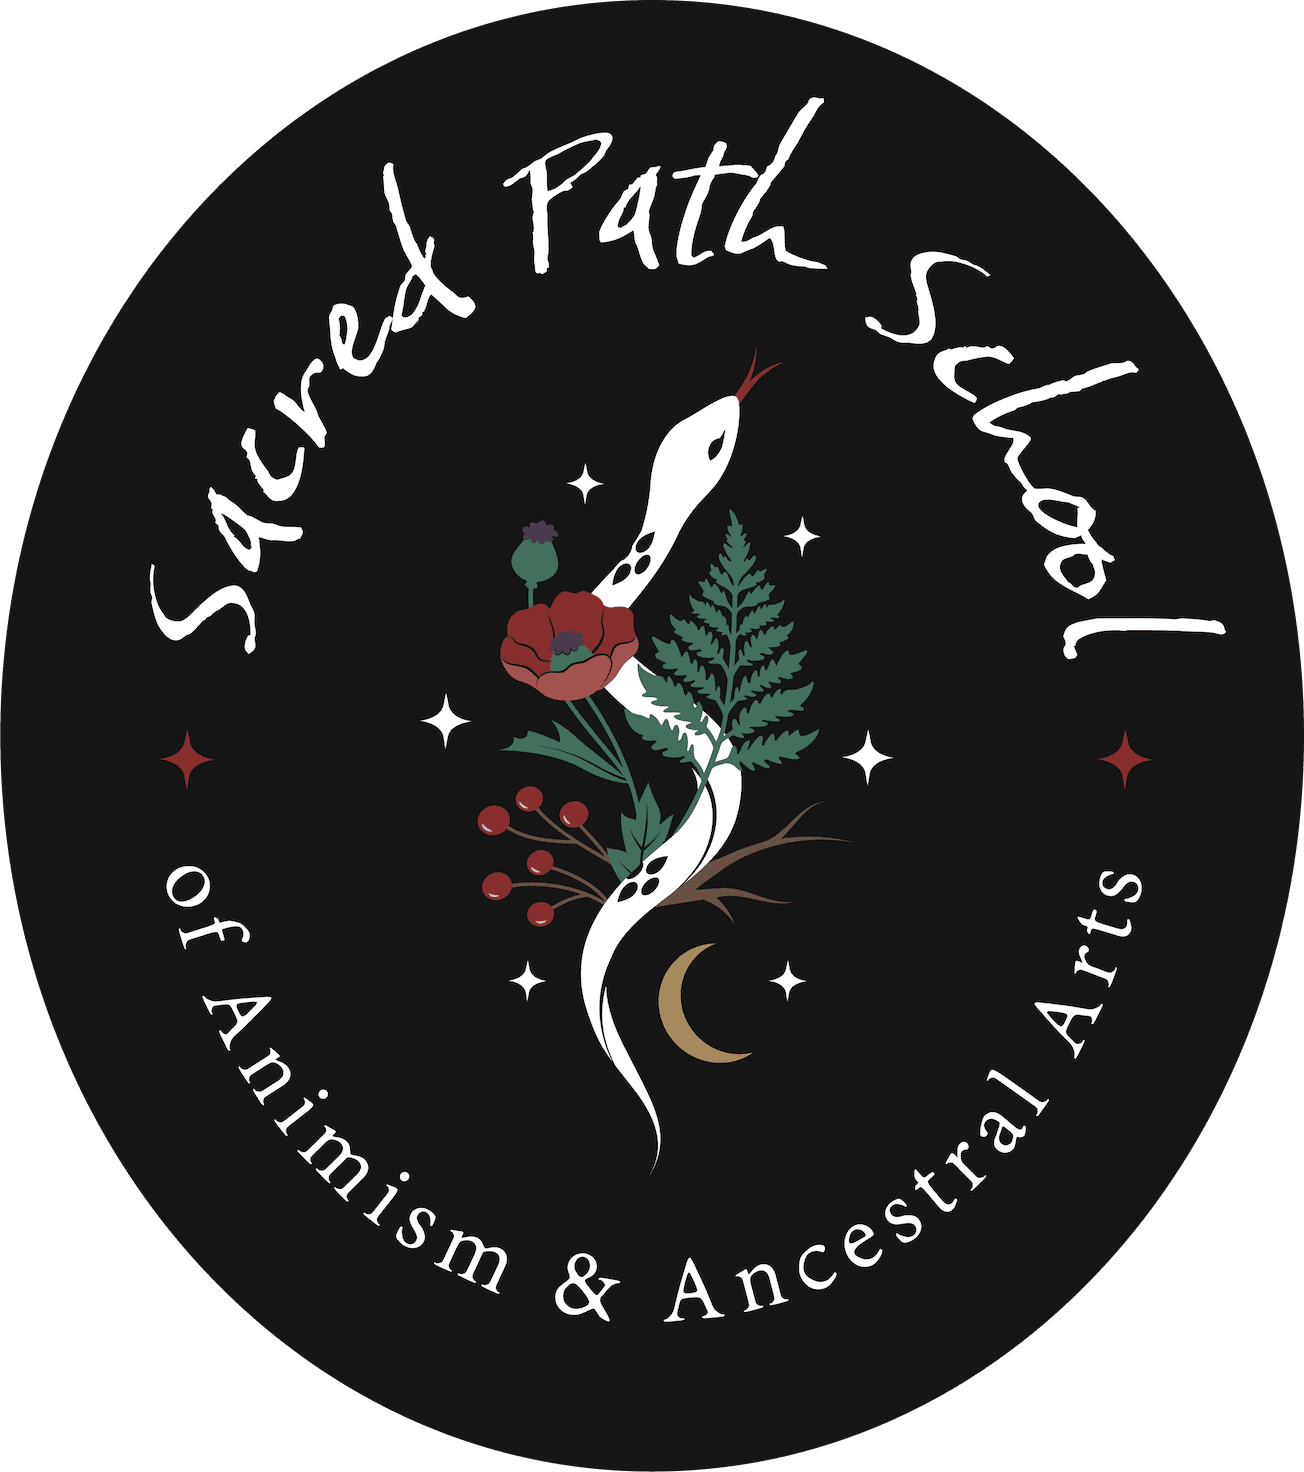 Sacred Path School of Animism and Ancestral Arts logo - a white snake intertwined with flowers, berries, ferns, and a crescent moon on a black background